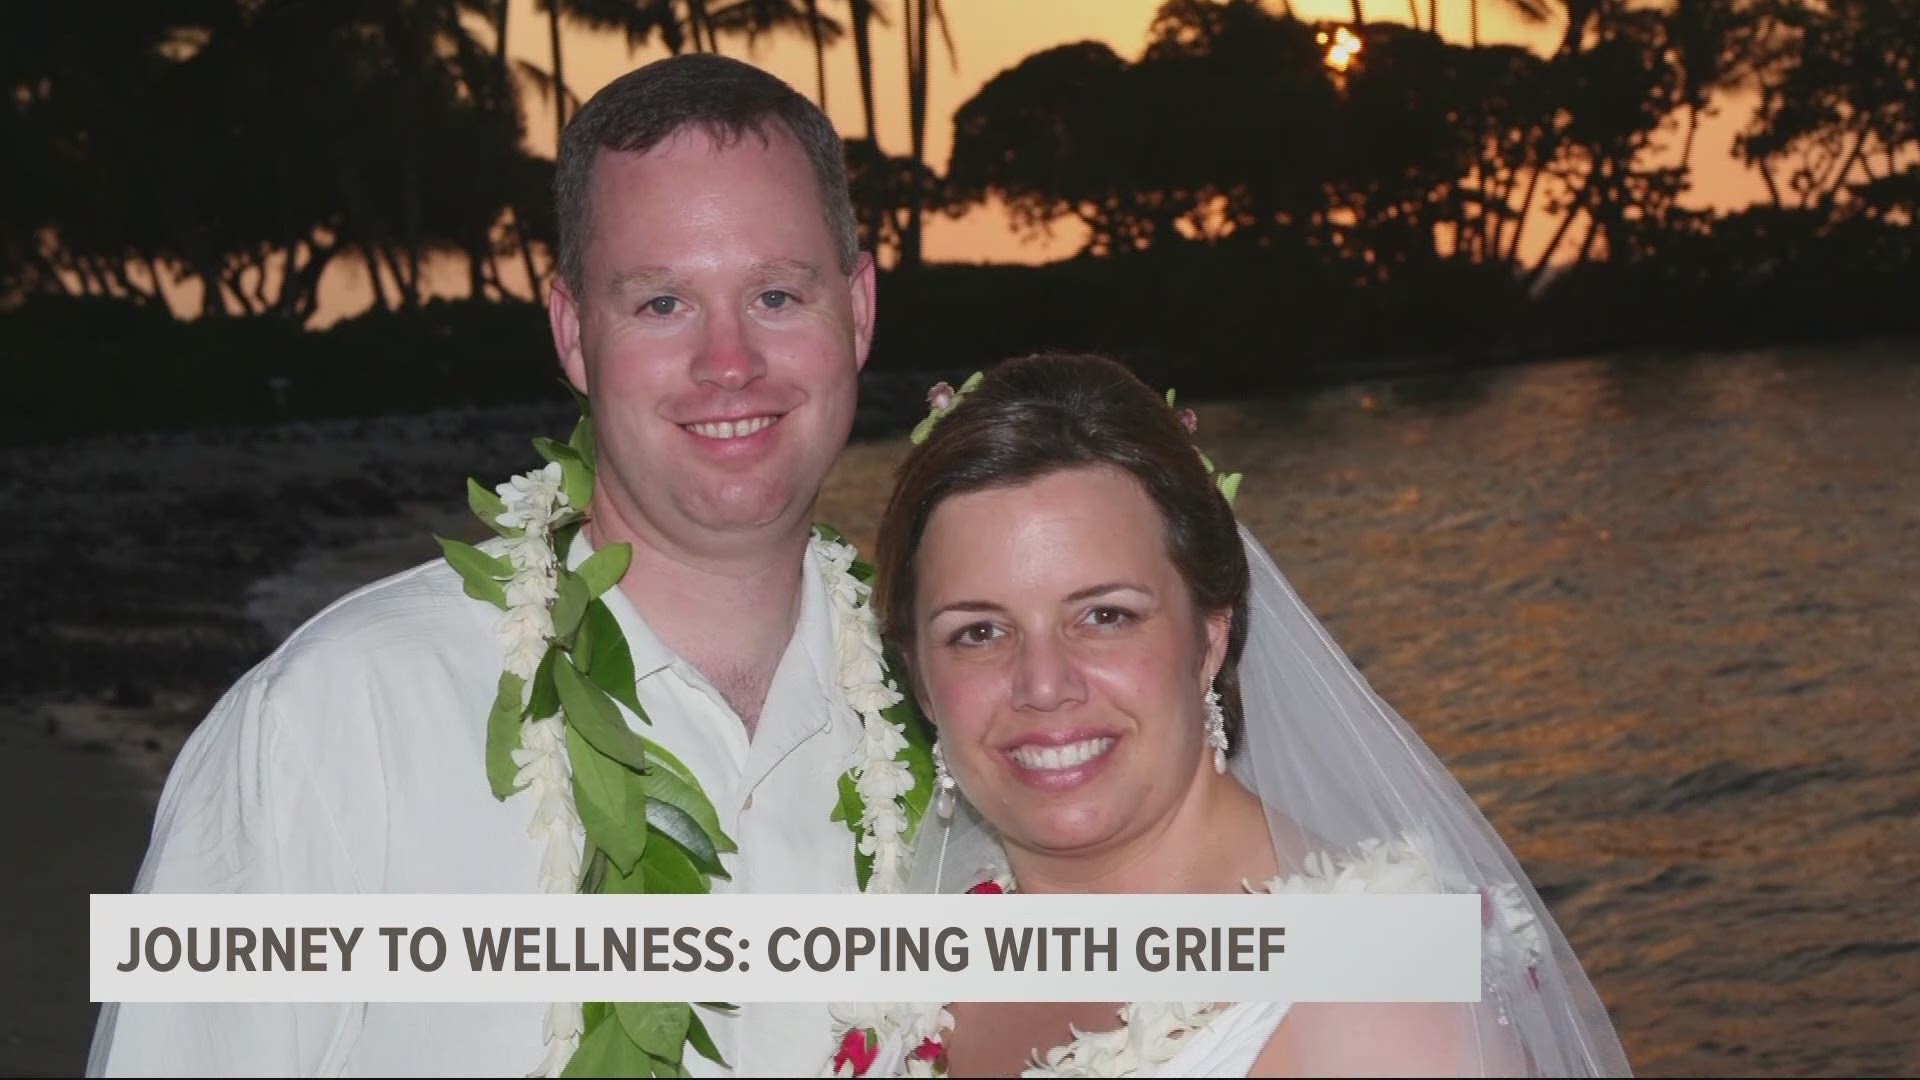 It can be tough to talk about grief. It's so personal. But as part of KGW’s “Journey to Wellness” series, here are some ways to help you and your loved ones cope.